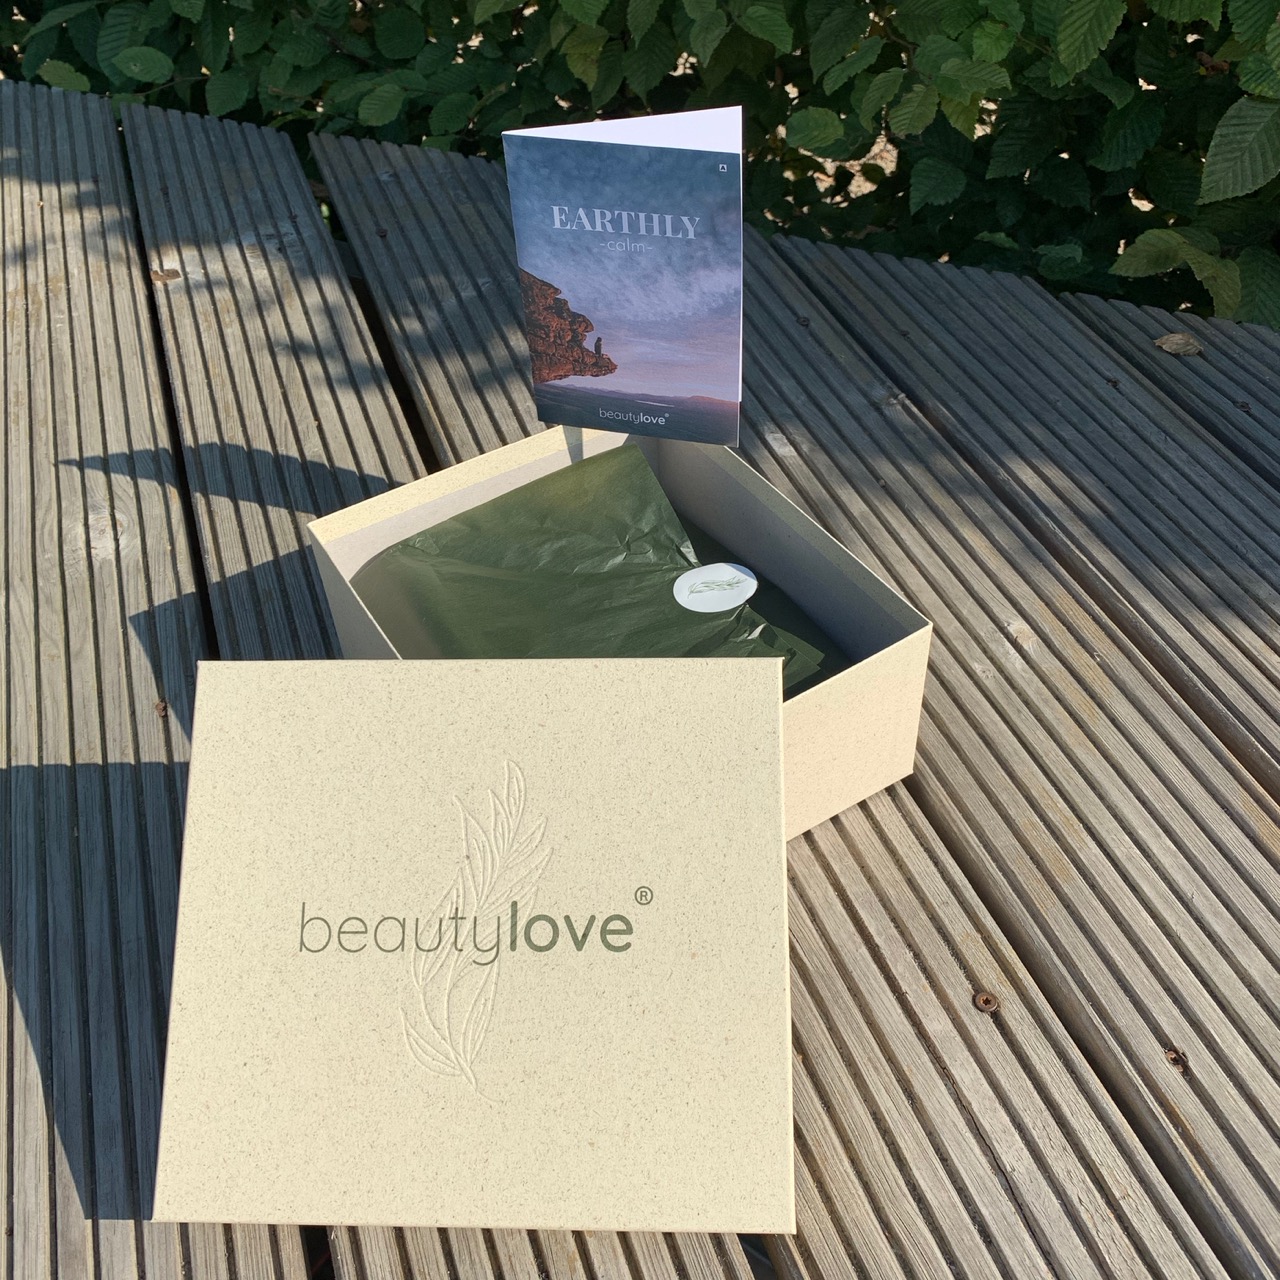 beautylove – The Natural Box: Earthly calm